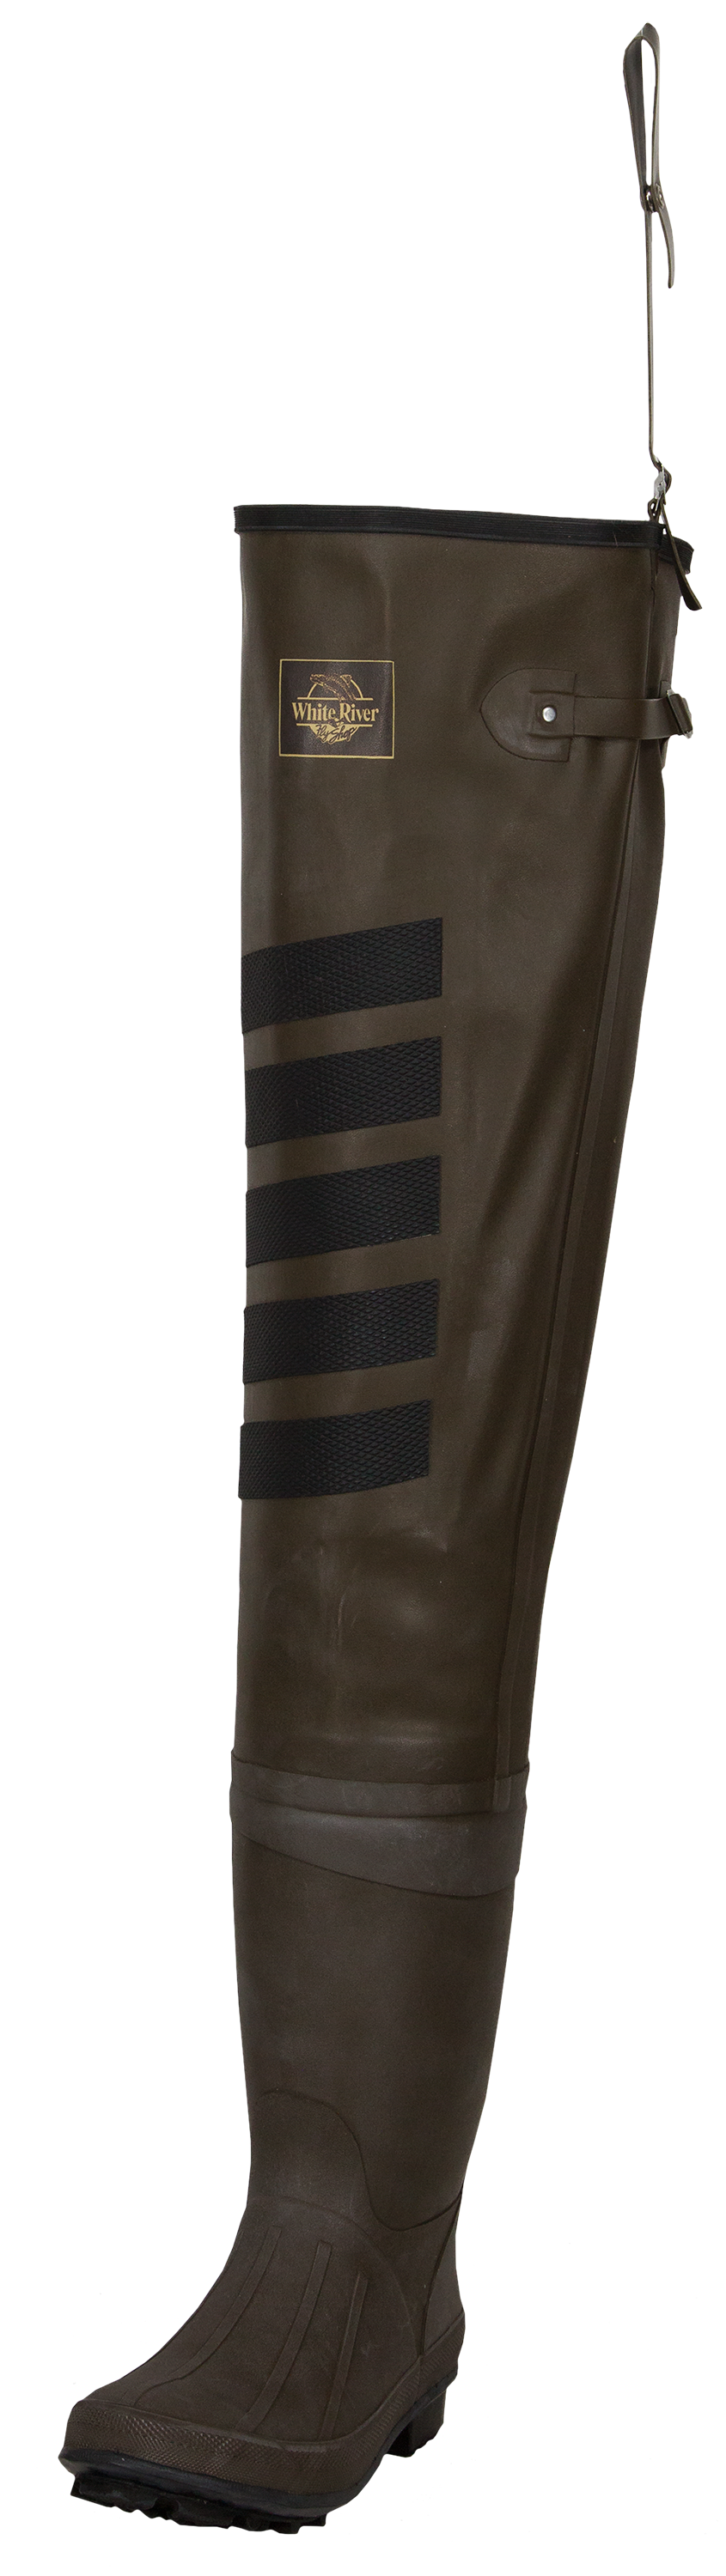 White River Fly Shop Youth Three Fork Lug-Sole Chest Waders - Light Brown